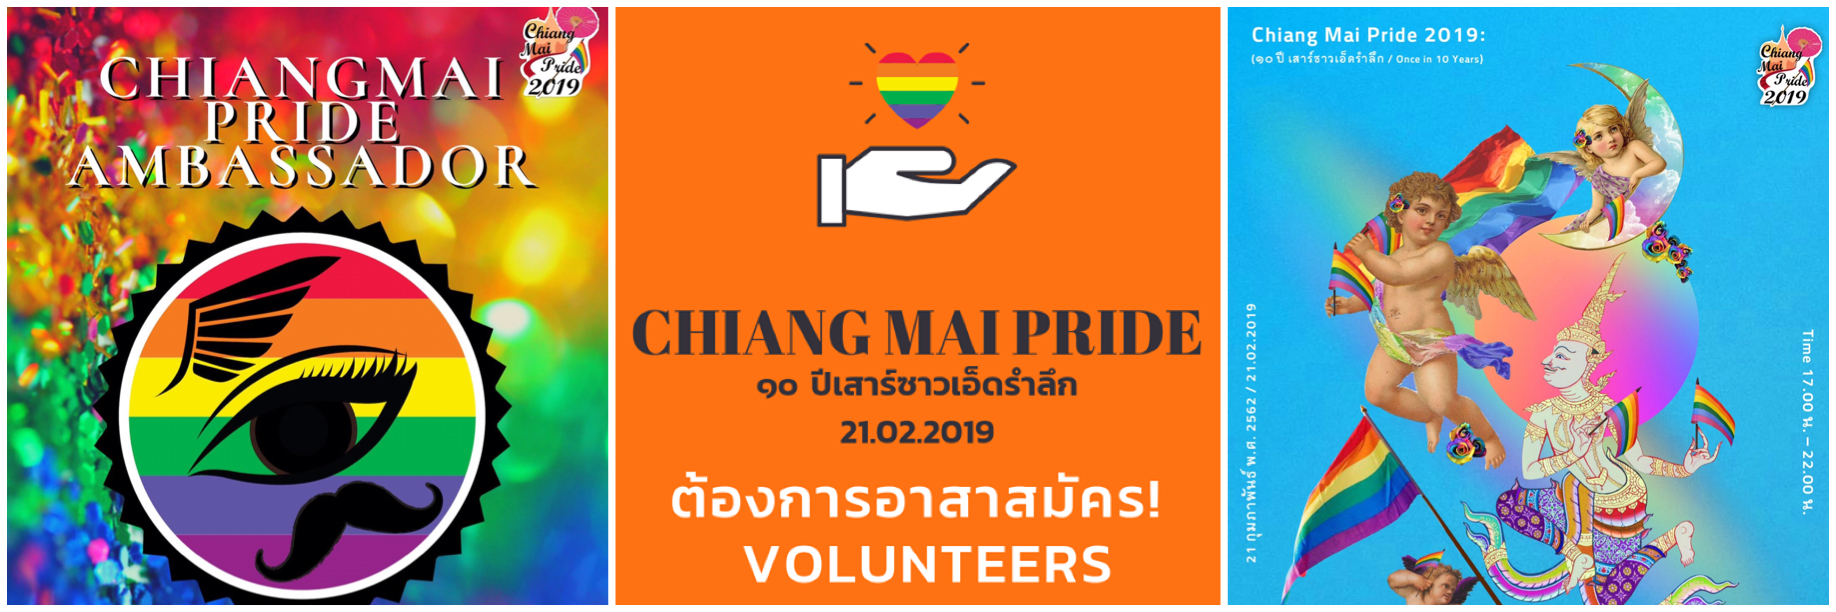 Chiang Mai Pride 2019 - Cover Montage 2